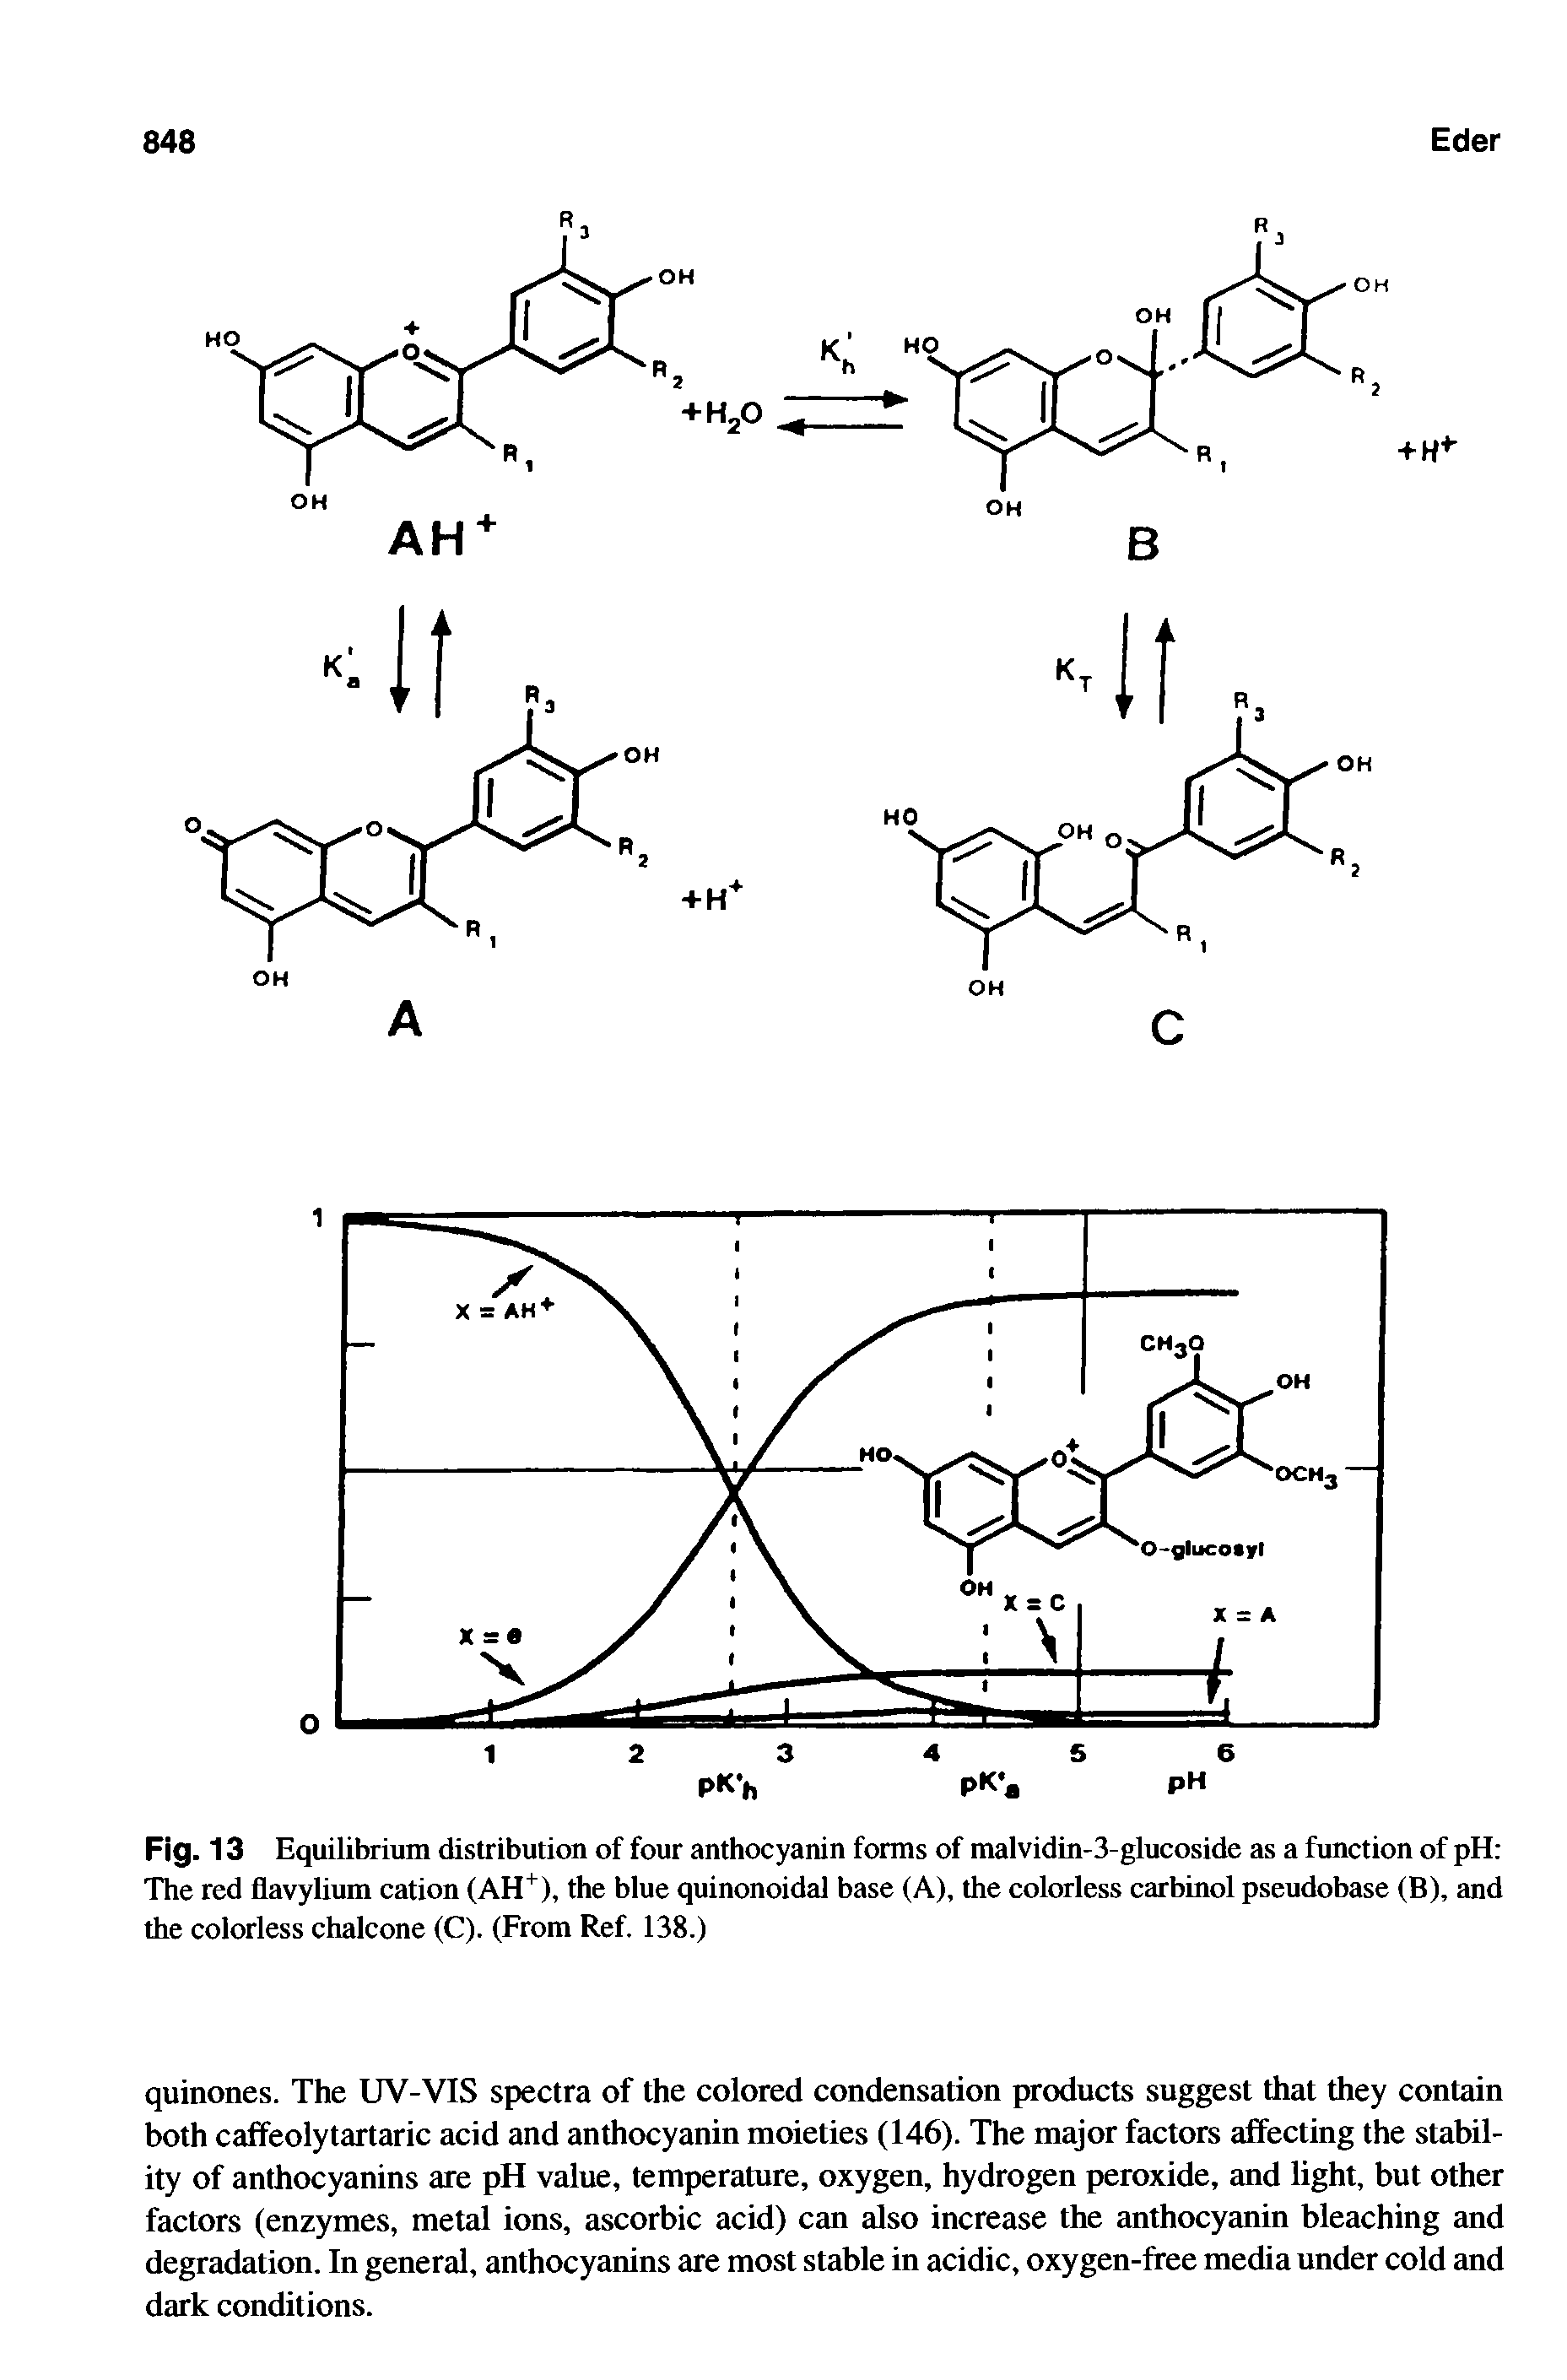 Fig. 13 Equilibrium distribution of four anthocyanin forms of malvidin-3-glucoside as a function of pH The red flavylium cation (AH+), the blue quinonoidal base (A), the colorless carbinol pseudobase (B), and the colorless chalcone (C). (From Ref. 138.)...